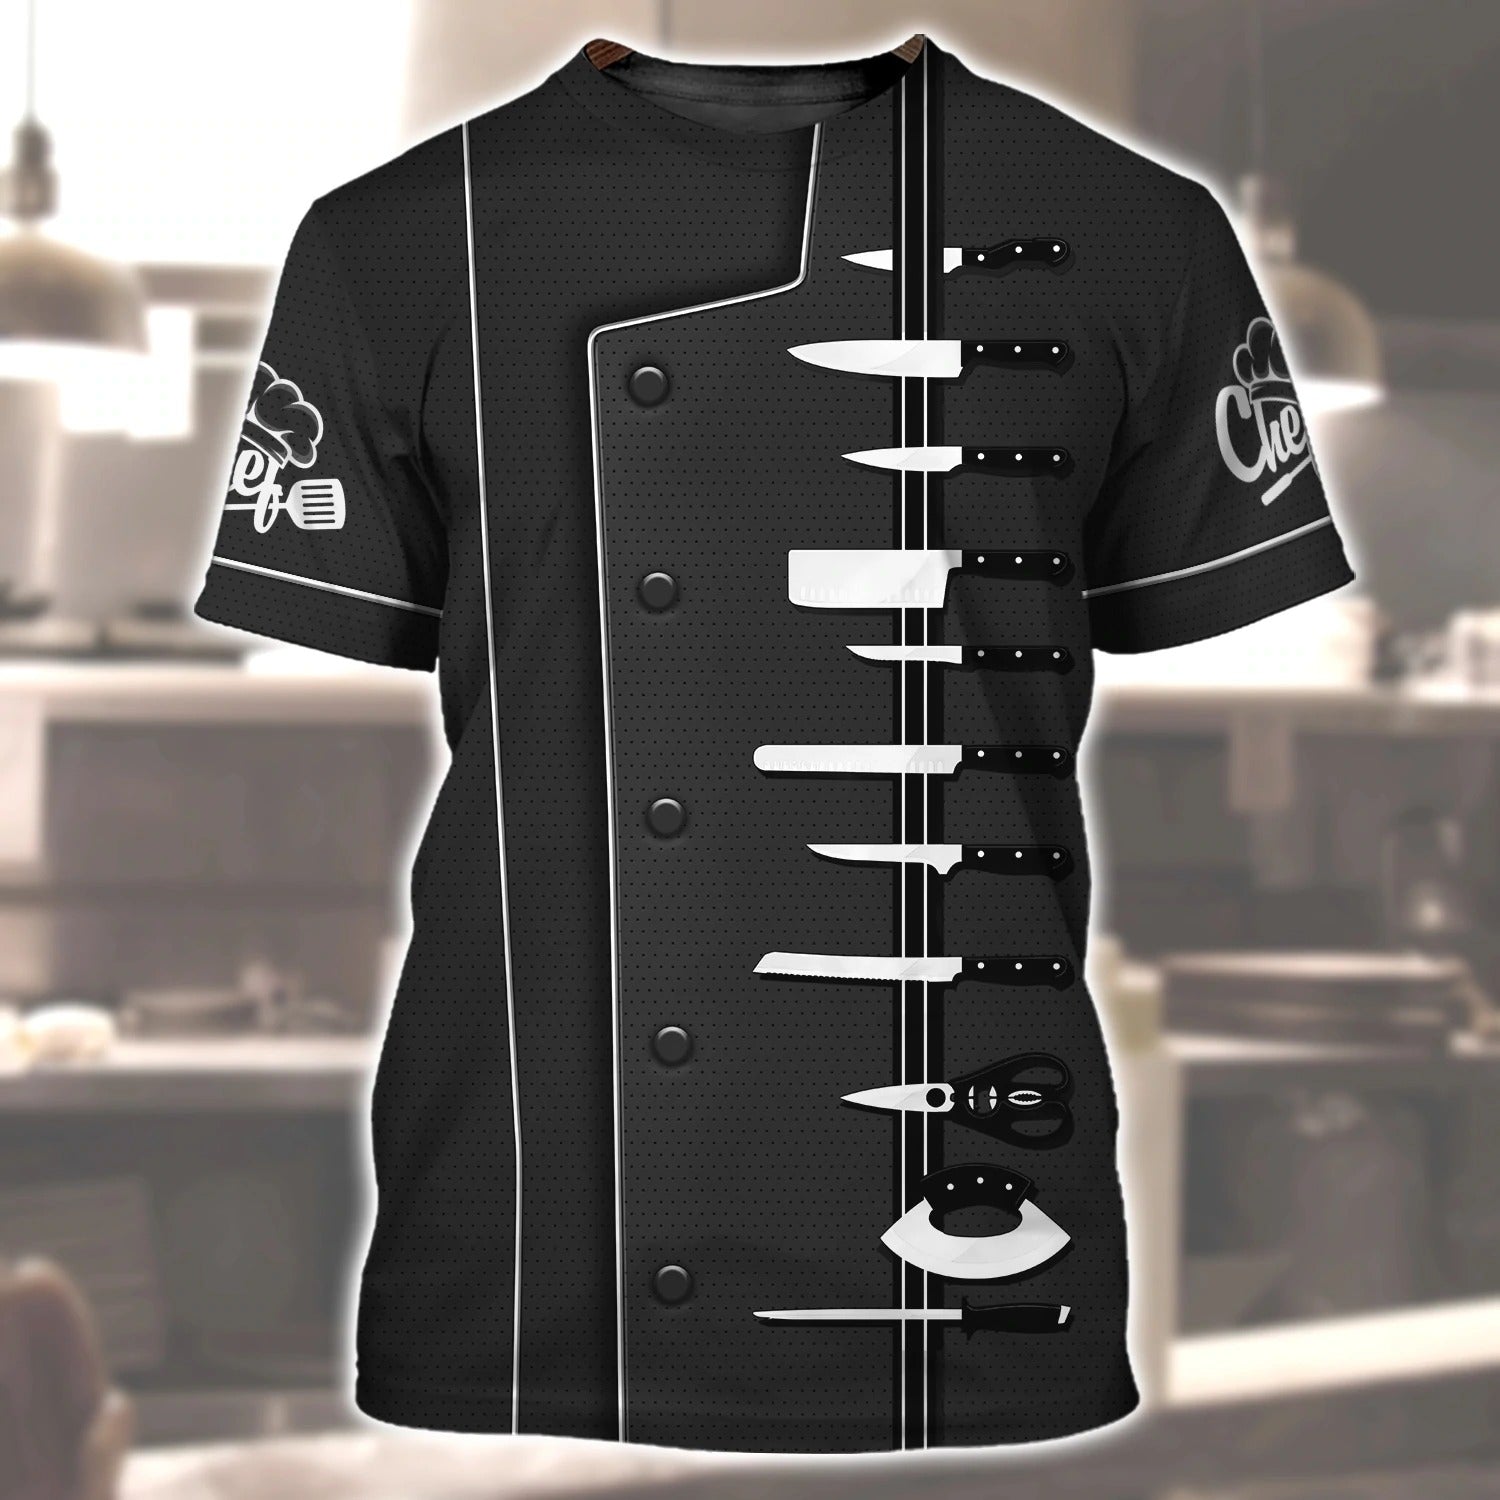 Chef 3D Shirt/ Bakery Chef Full Print Tee Shirt/ Personalized Name 3D Tshirt/ Sublimation Master Chef T Shirt